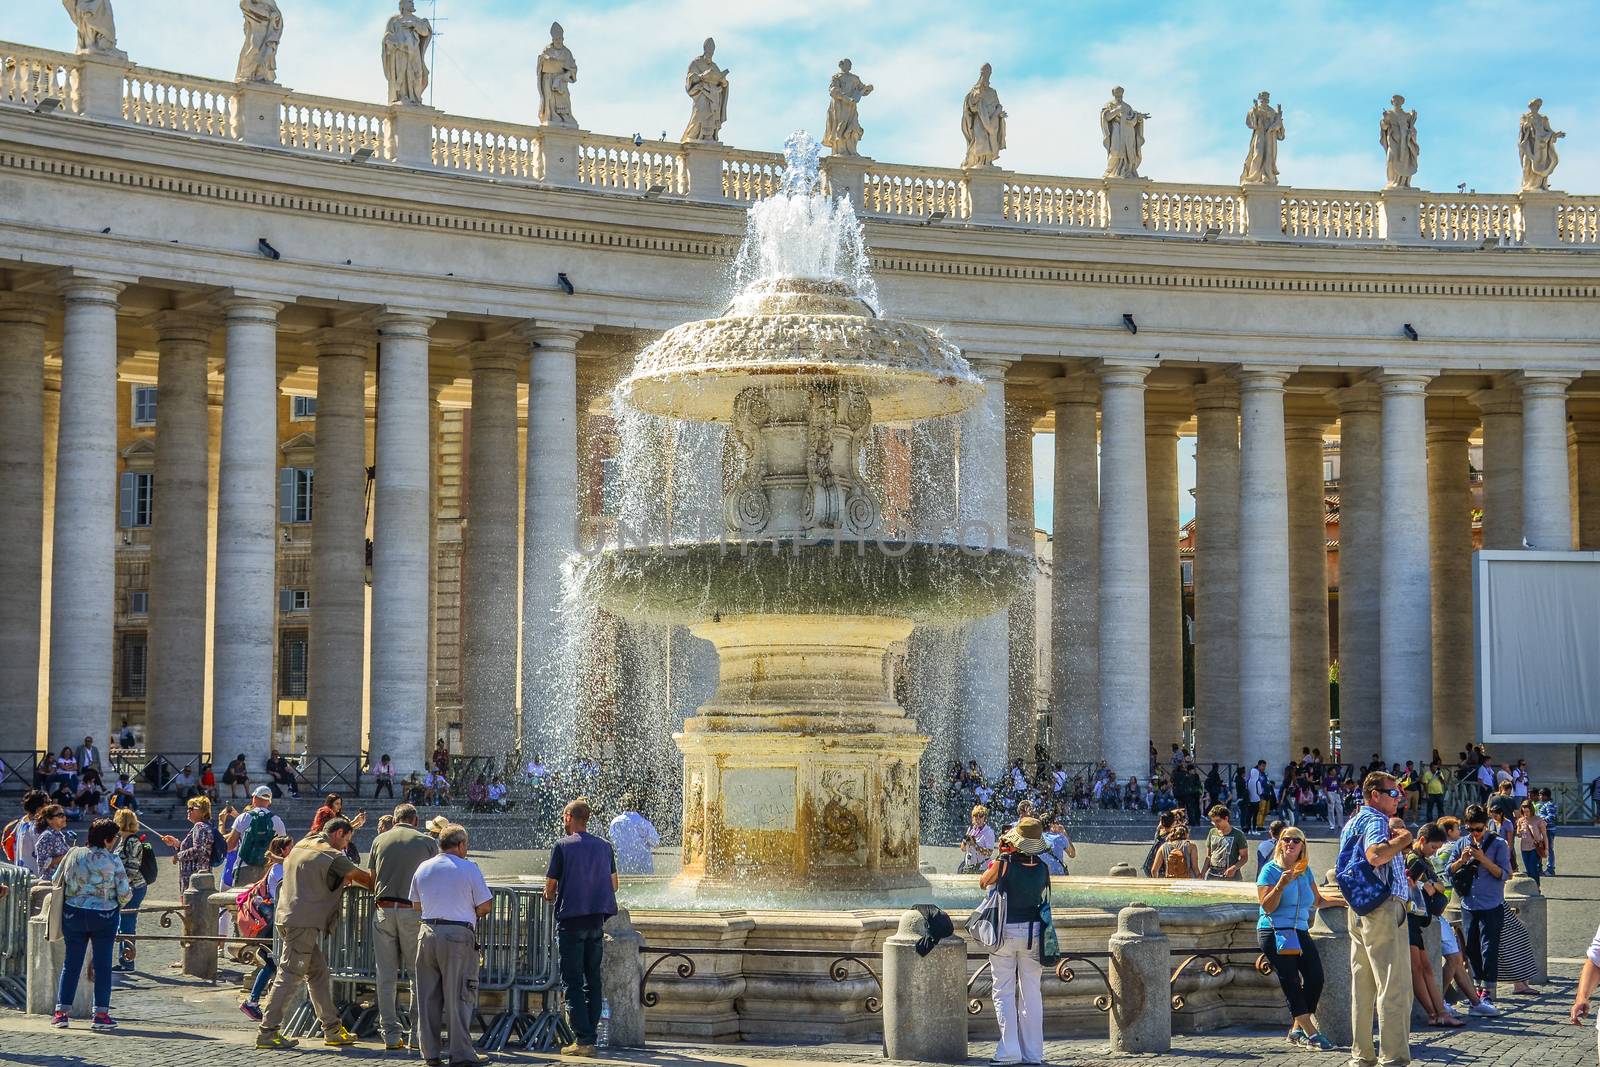 Fountain at Saint Peter's Square in Rome, Vatican City